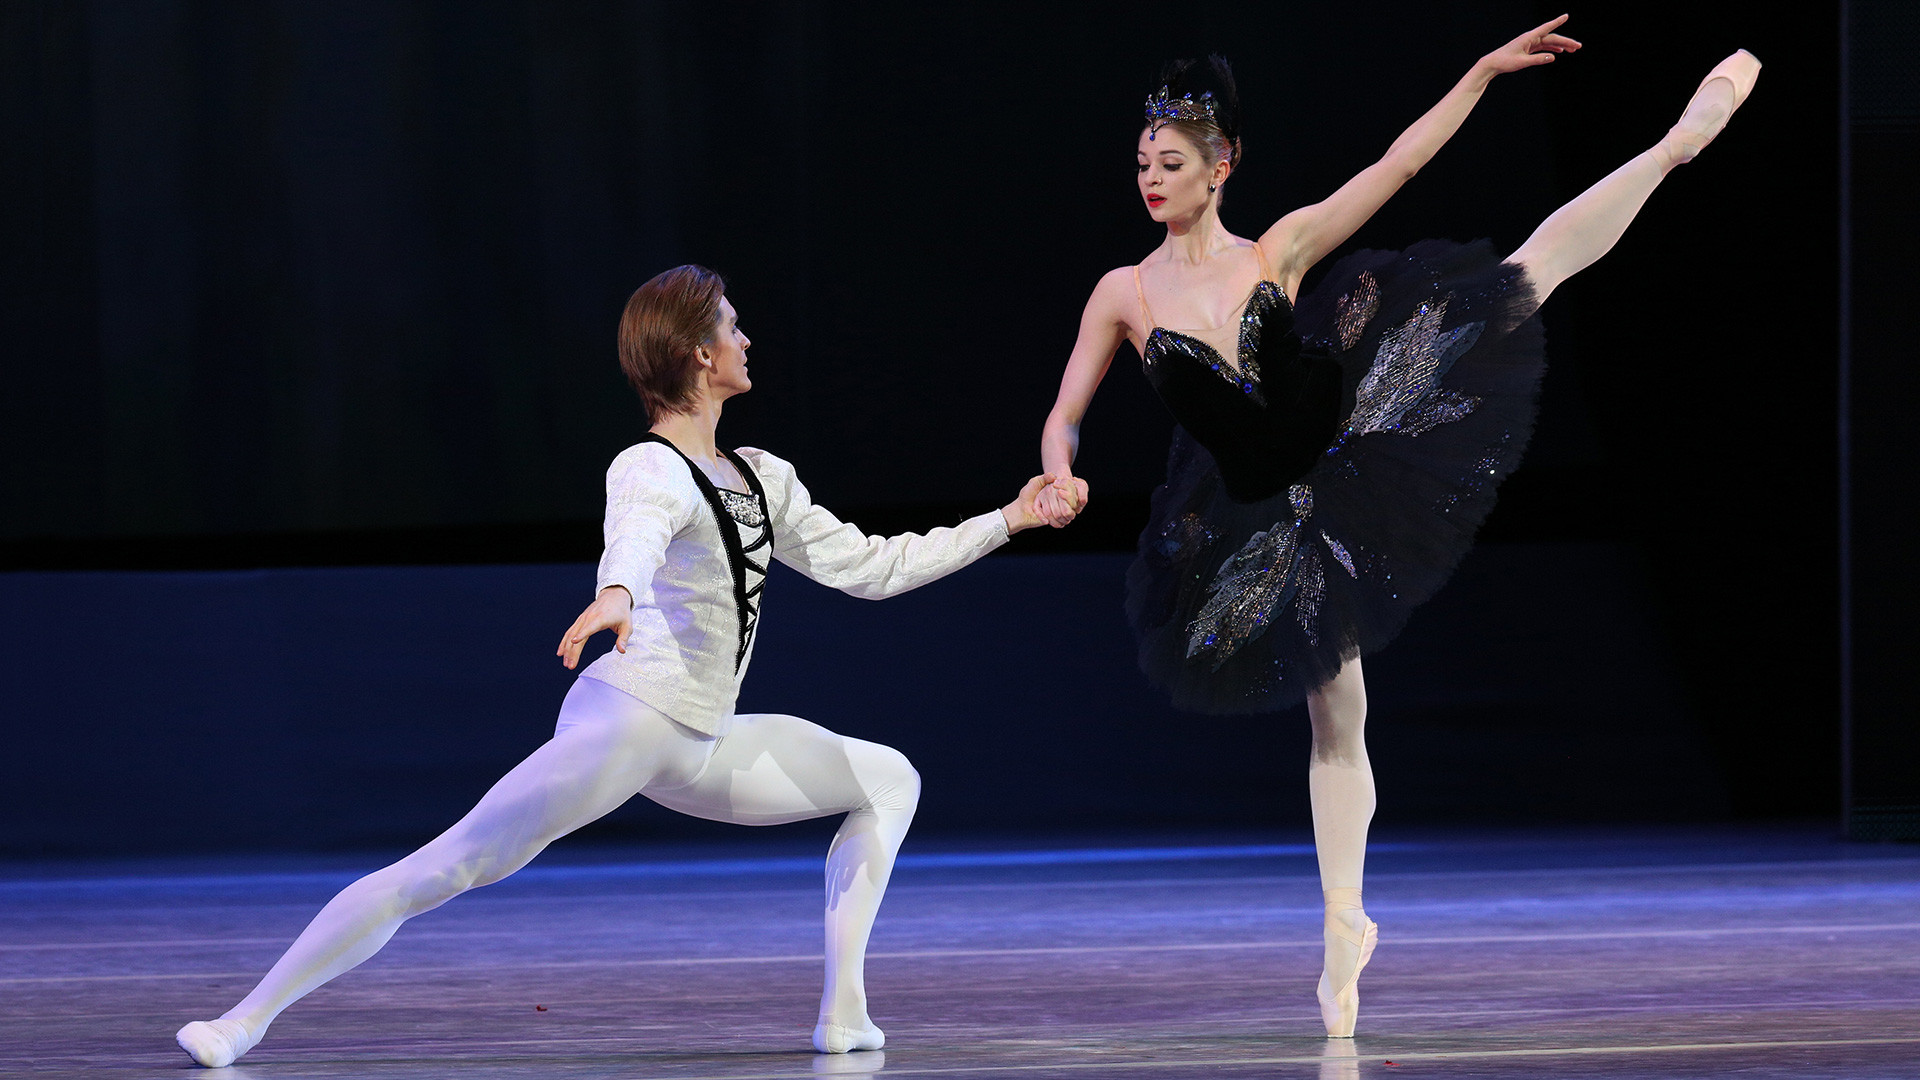 Angelina Vorontsova and Denis Rodkin performing a piece from Swan Lake on the stage of The State Kremlin Palace.